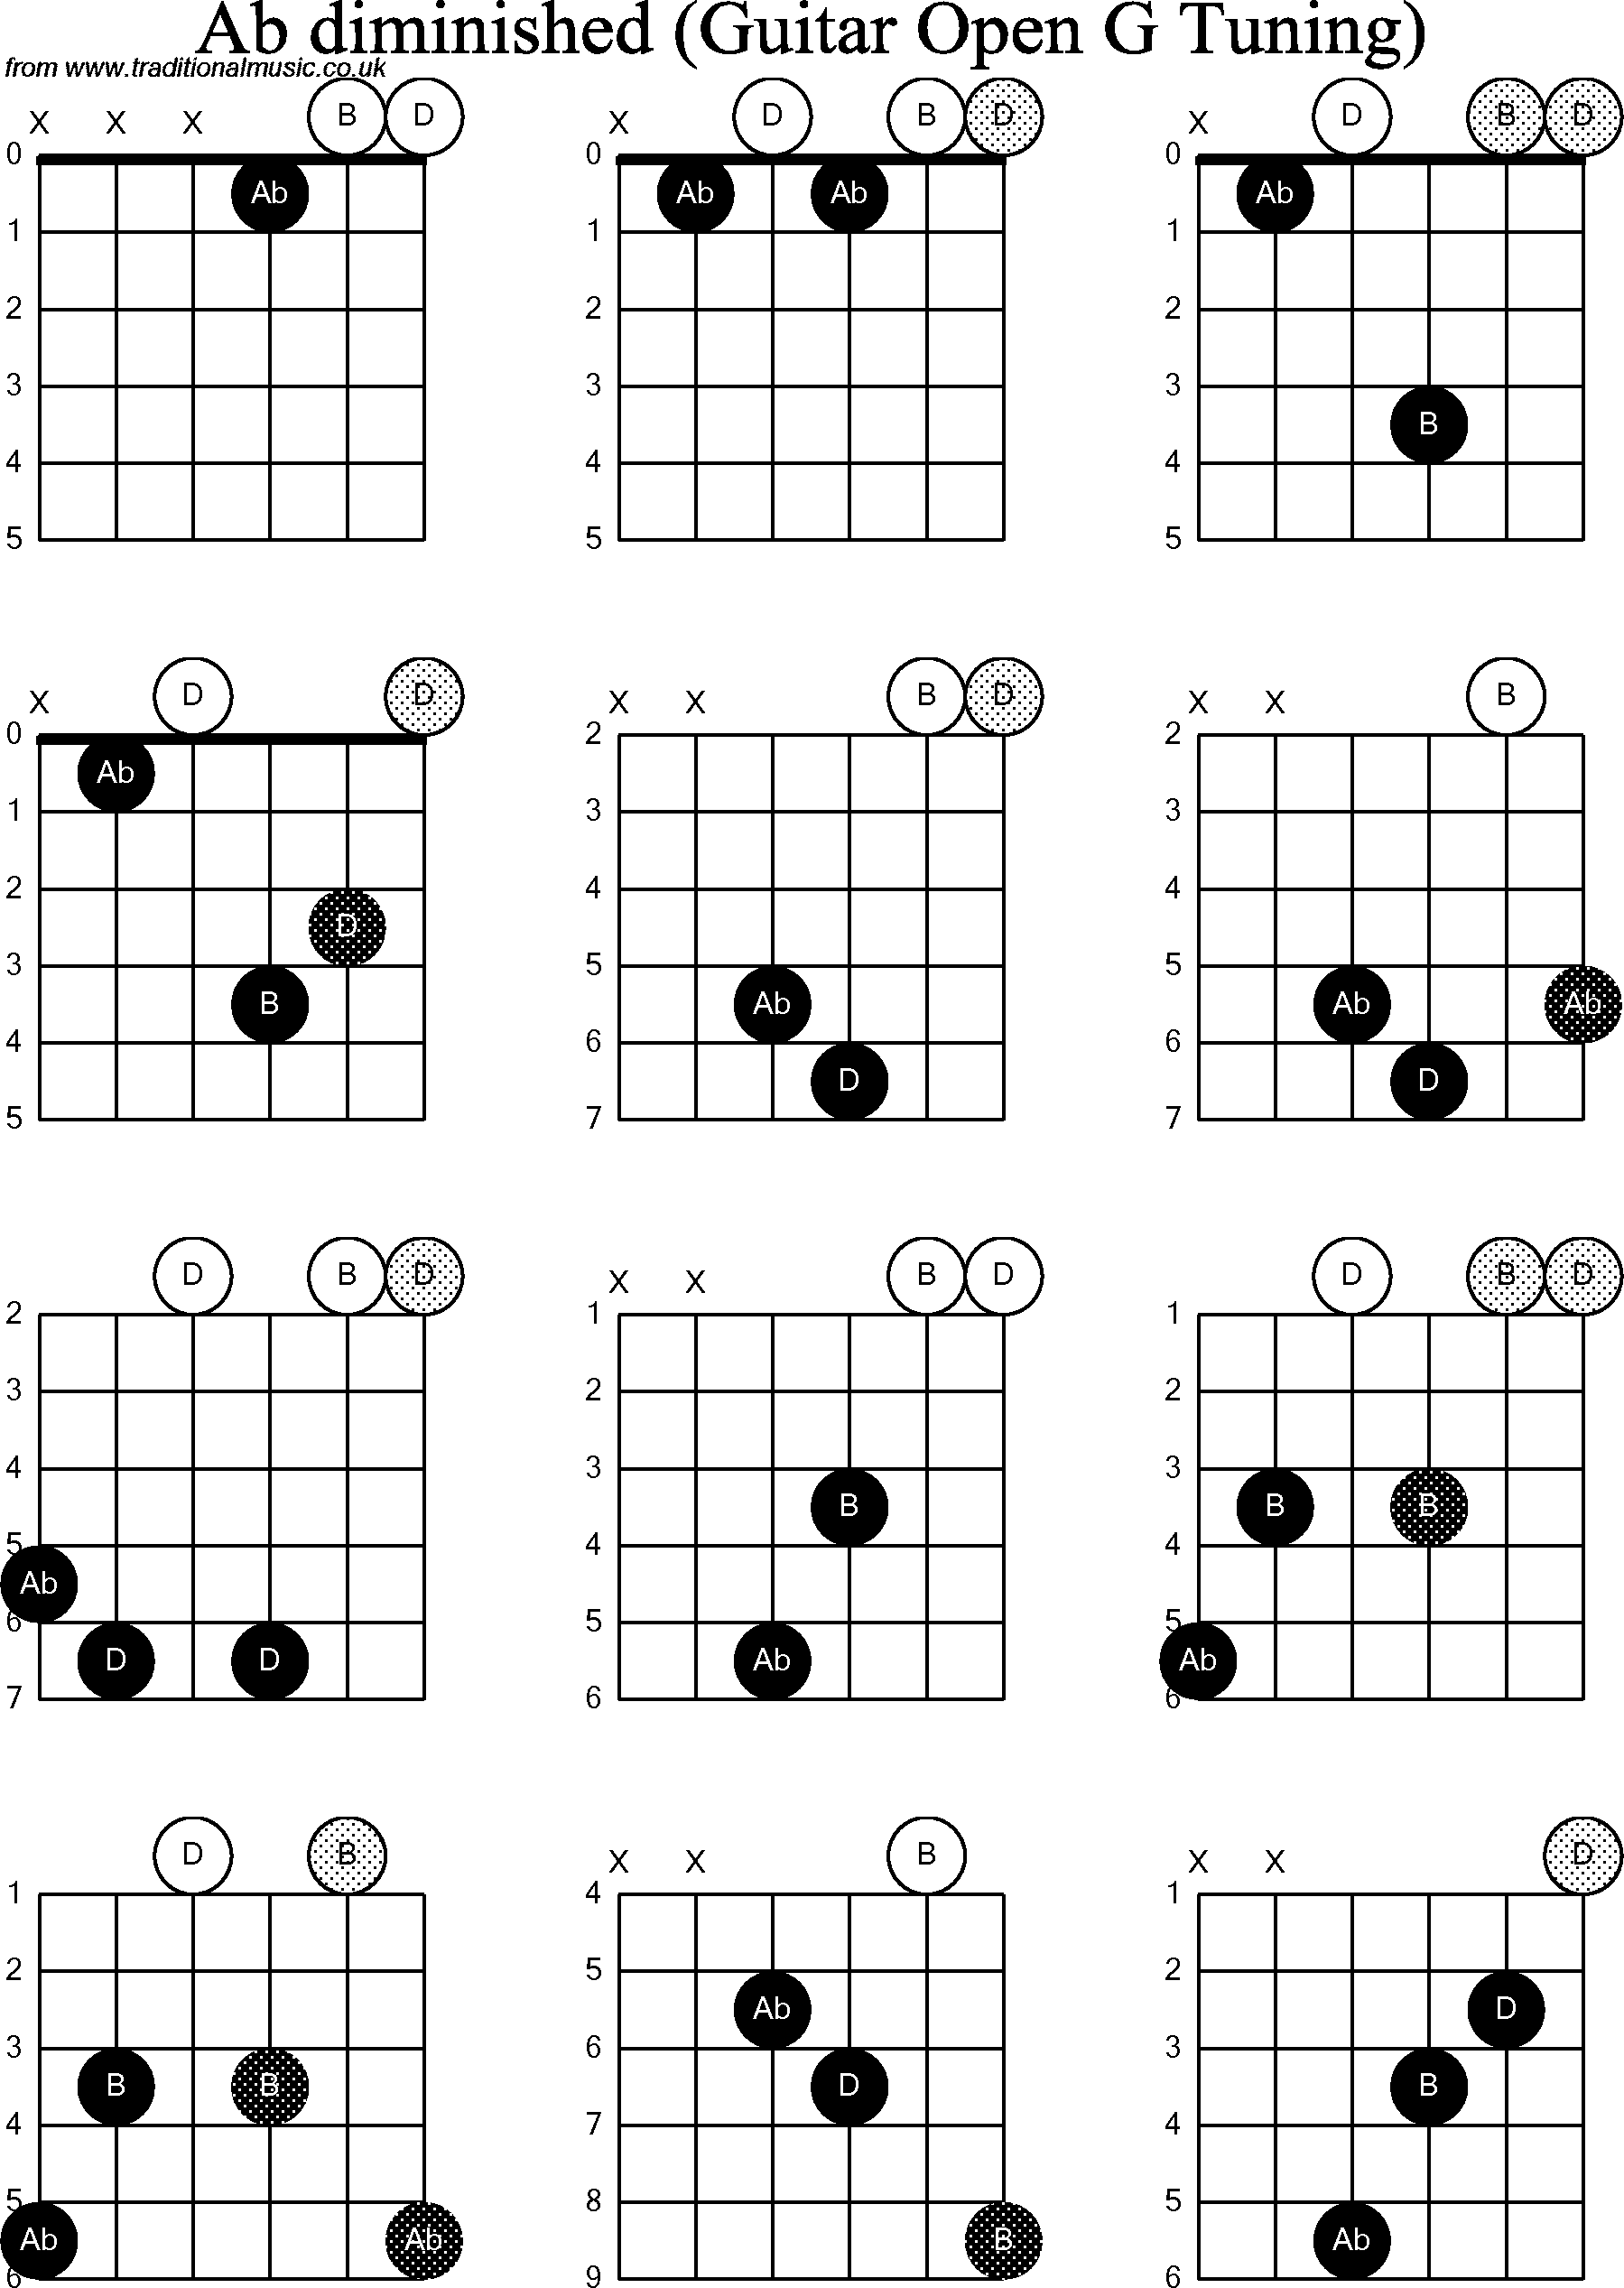 Chord diagrams for Dobro Ab Diminished